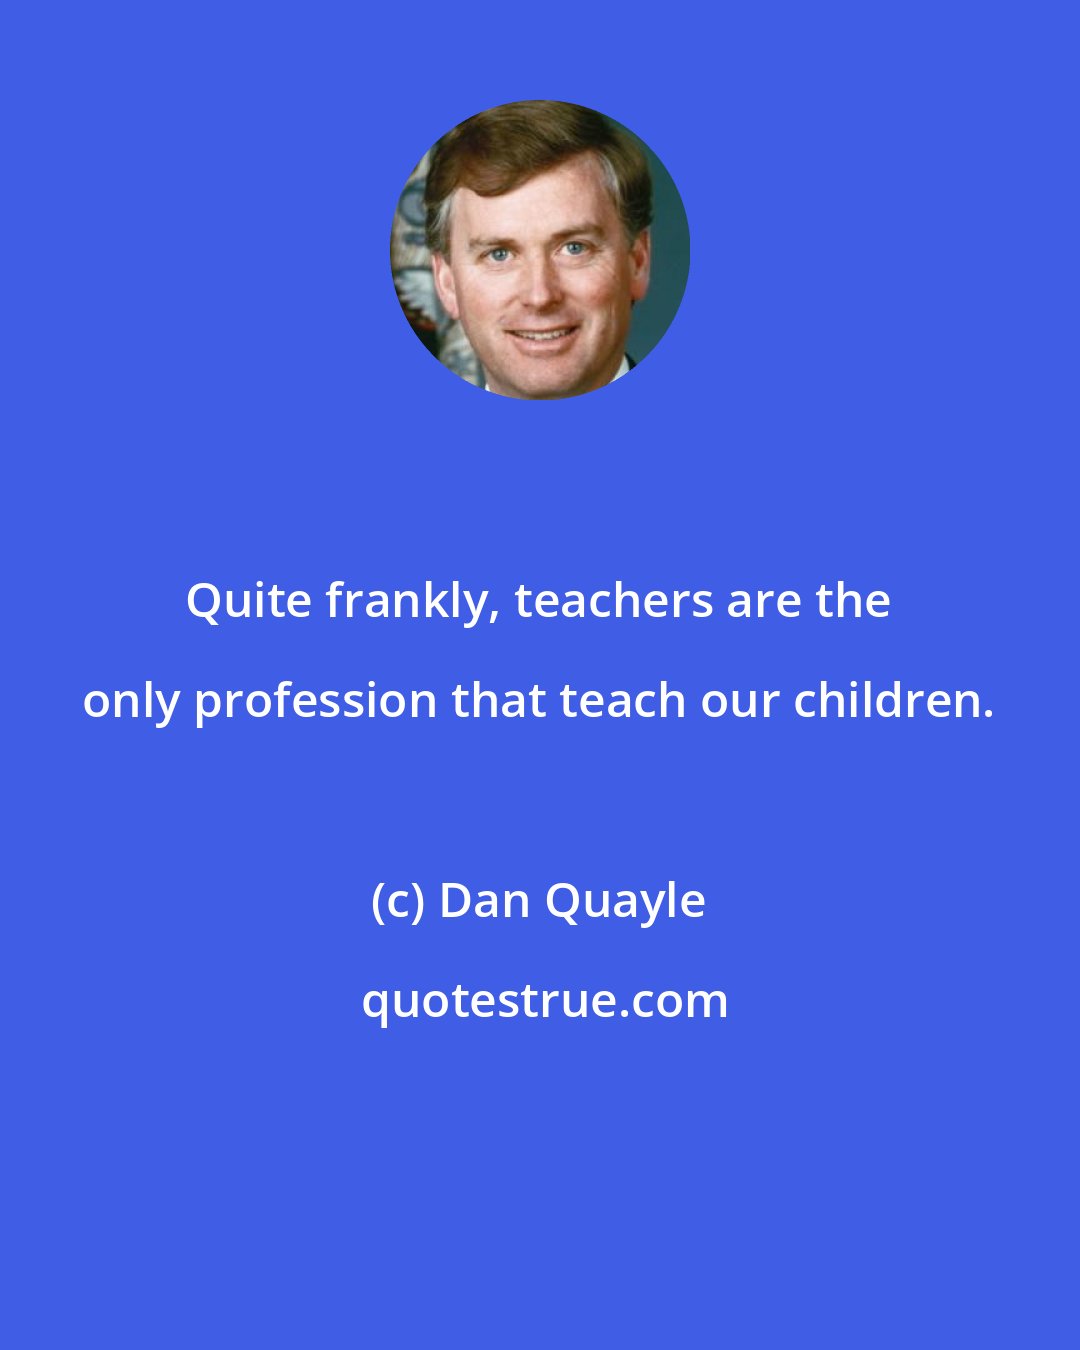 Dan Quayle: Quite frankly, teachers are the only profession that teach our children.